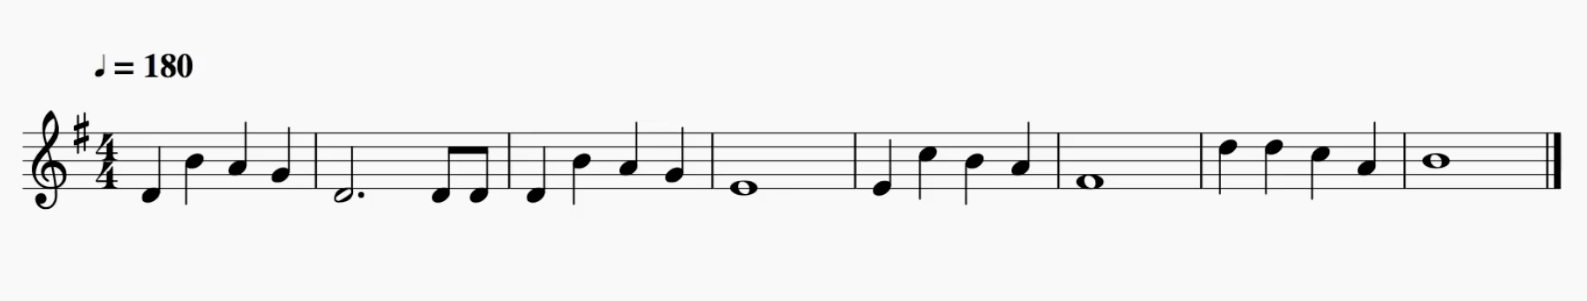 4/4 time signature or music meter